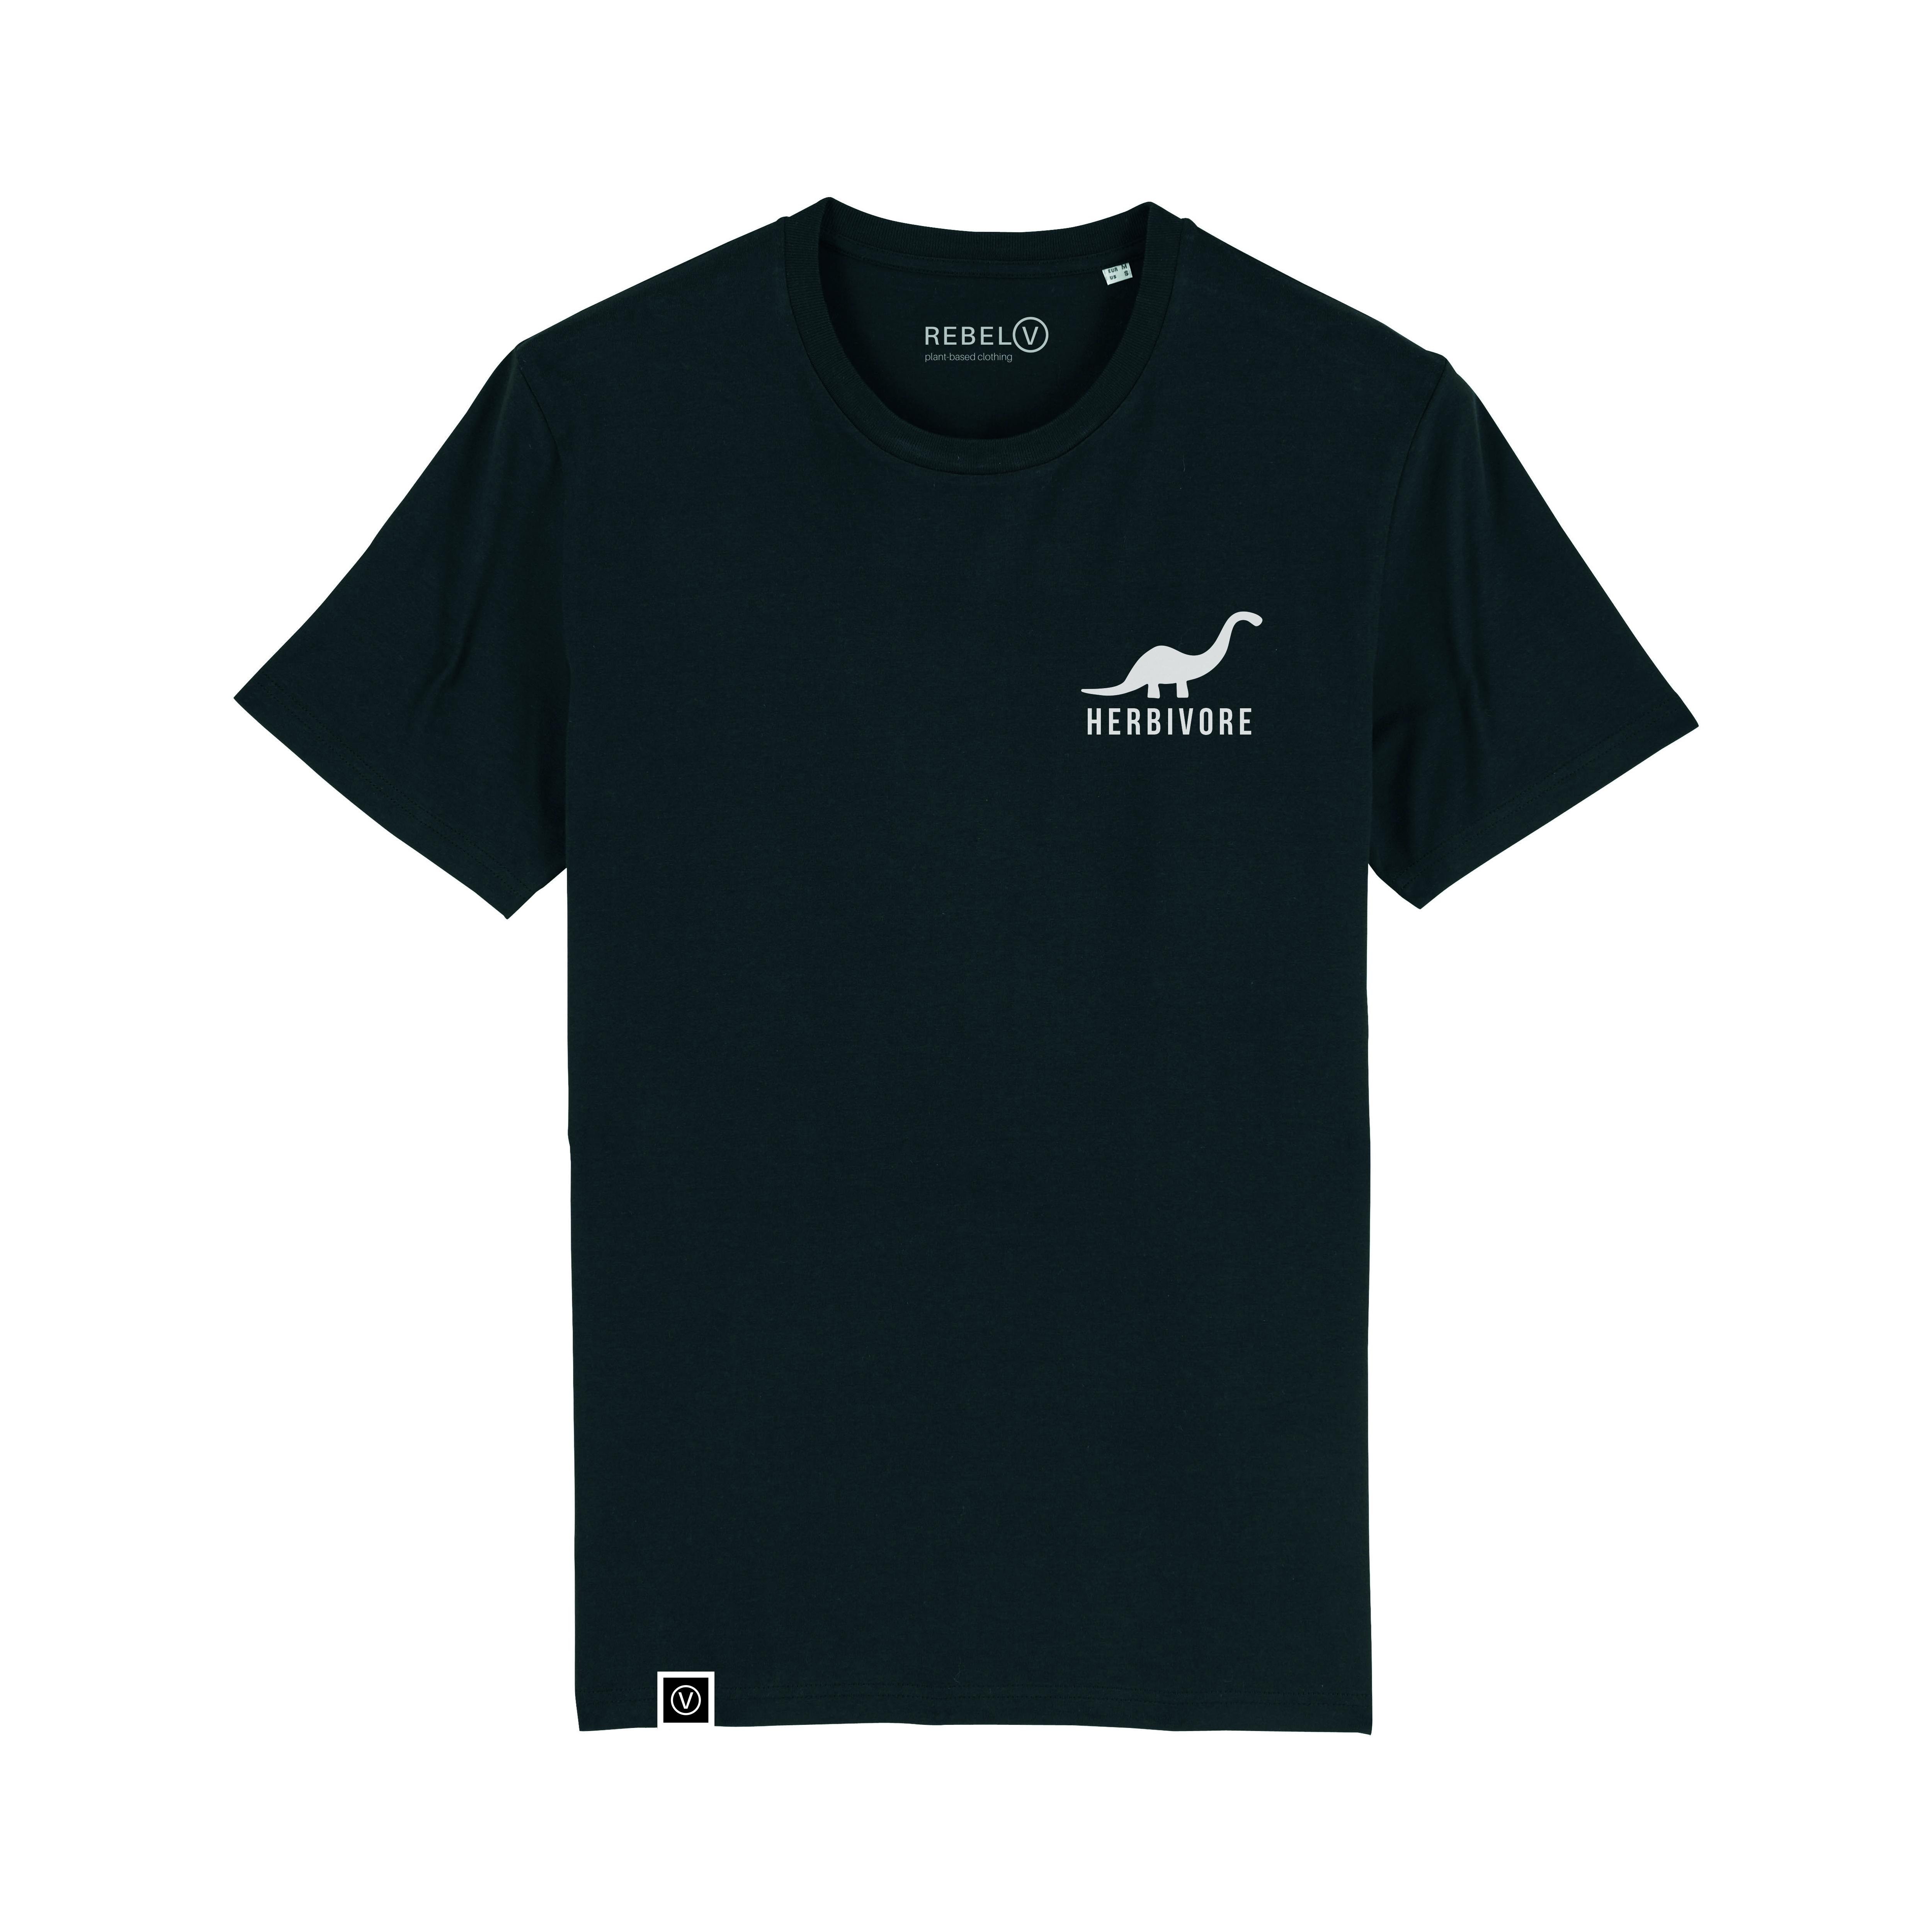 Black t-shirt on a white background. White dinosaur on left chest with the word herbivore in white underneath. Small white square label on bottom right hem with a white V in a white circle on a black background.